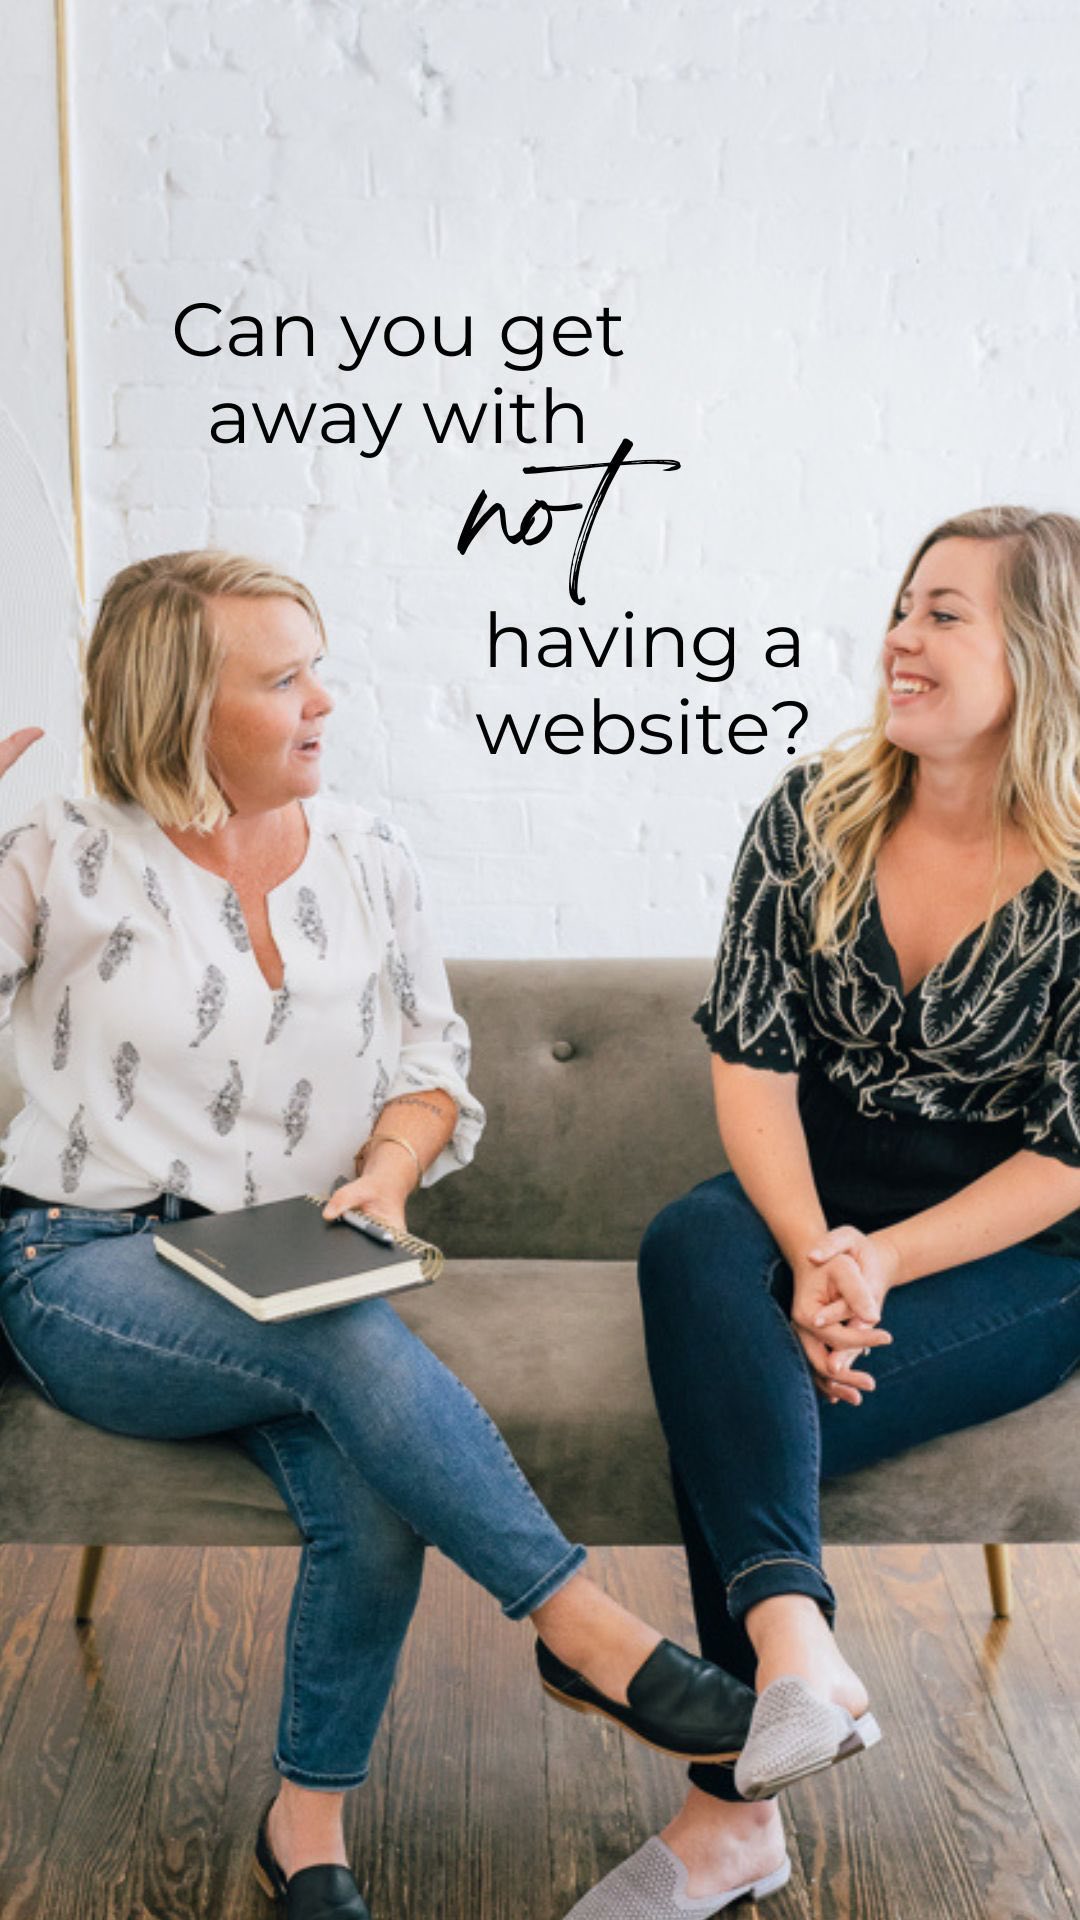 PSA 📣 your social media accounts aren’t a substitute for a real website 👎

“But why?!”
We know social media can be where you spend a lot of your time as a business owner, but there are some real drawbacks to not investing time and energy into creating a functional website!

1️⃣ You don’t own your social media - Meta (or TikTok, etc) does! 
At any given time the app could stop working, your account could be deleted or banned, or the social media gods could decide to shut down a platform. If all your eggs are in your social media basket…then what?!

2️⃣ It’s much harder to collect QUALITY leads without an actual lead form (even if it’s just a landing page!). 
You can chat with people in DMs all day long, but you have no way of mass collecting email addresses, phone numbers, or any other contact info that will actually help them to CONVERT into a real client on social media alone! 

3️⃣ SEO & organic search matter!
When people go looking for a product or service, Google is typically the first place they go. If you don’t have a website (especially one that’s SEO optimized), your chances of showing up just through your social media accounts are pretty slim! 

We could go on and on, but let us leave you with this: having a website matters big time!! 

Need help getting your website up to snuff? Reach out for a consultation and let us take a look at what you’ve got! 

#websitedesign #websitedevelopment #webdesign #smallbusiness #smallbusinesssupport #smallbusinessmarketing #socialmediamarketing #marketingtips